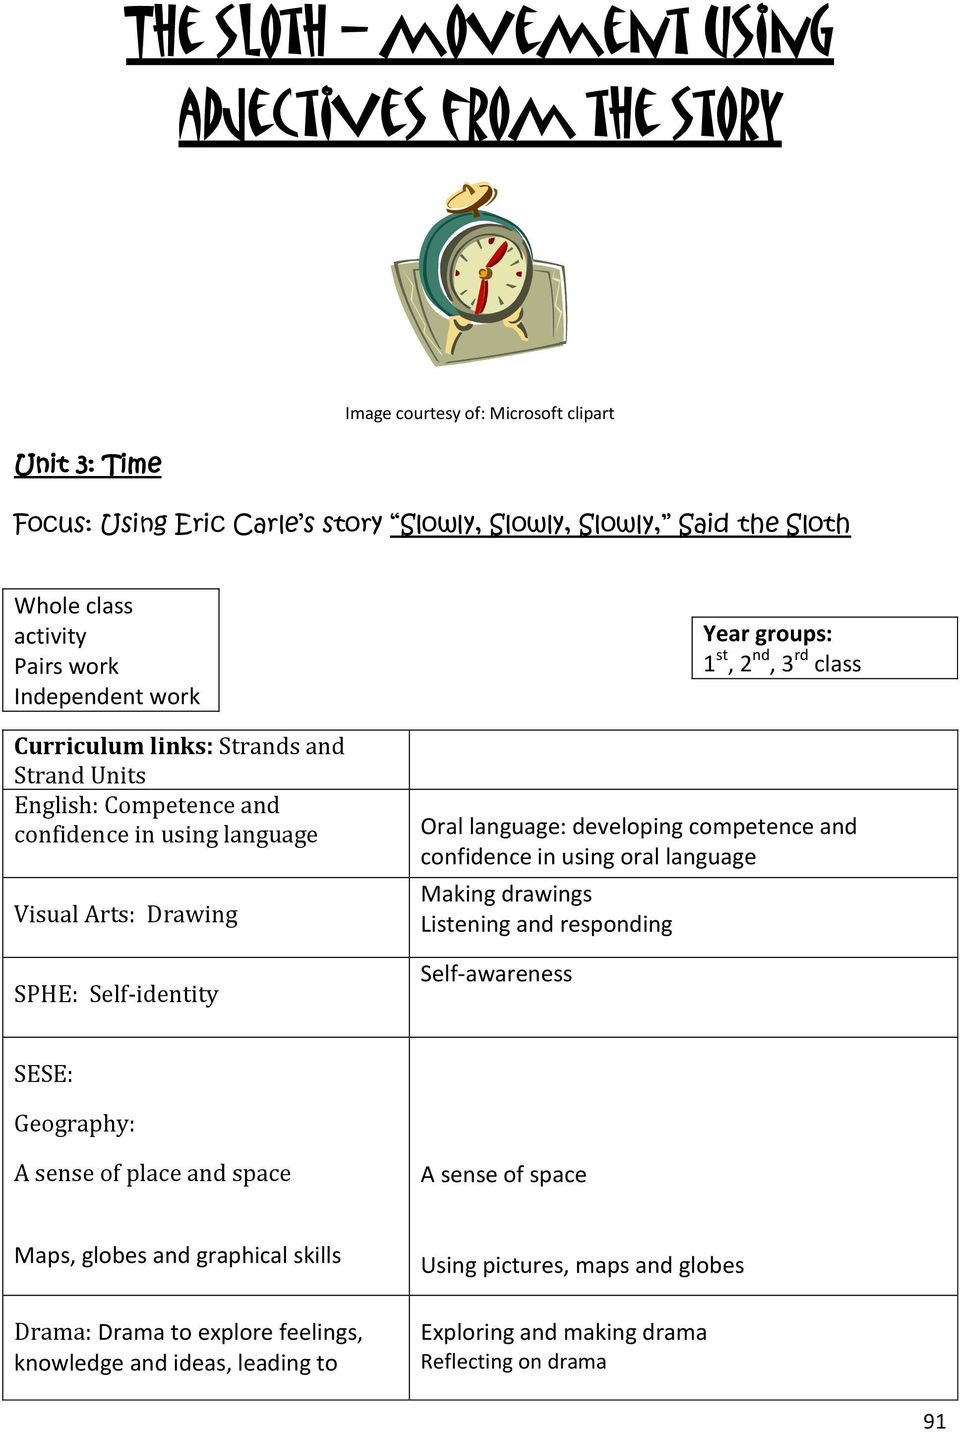 st, 2 nd, 3 rd class Oral language: developing competence and confidence in using oral language Making drawings Listening and responding Self-awareness SESE: Geography: A sense of place and